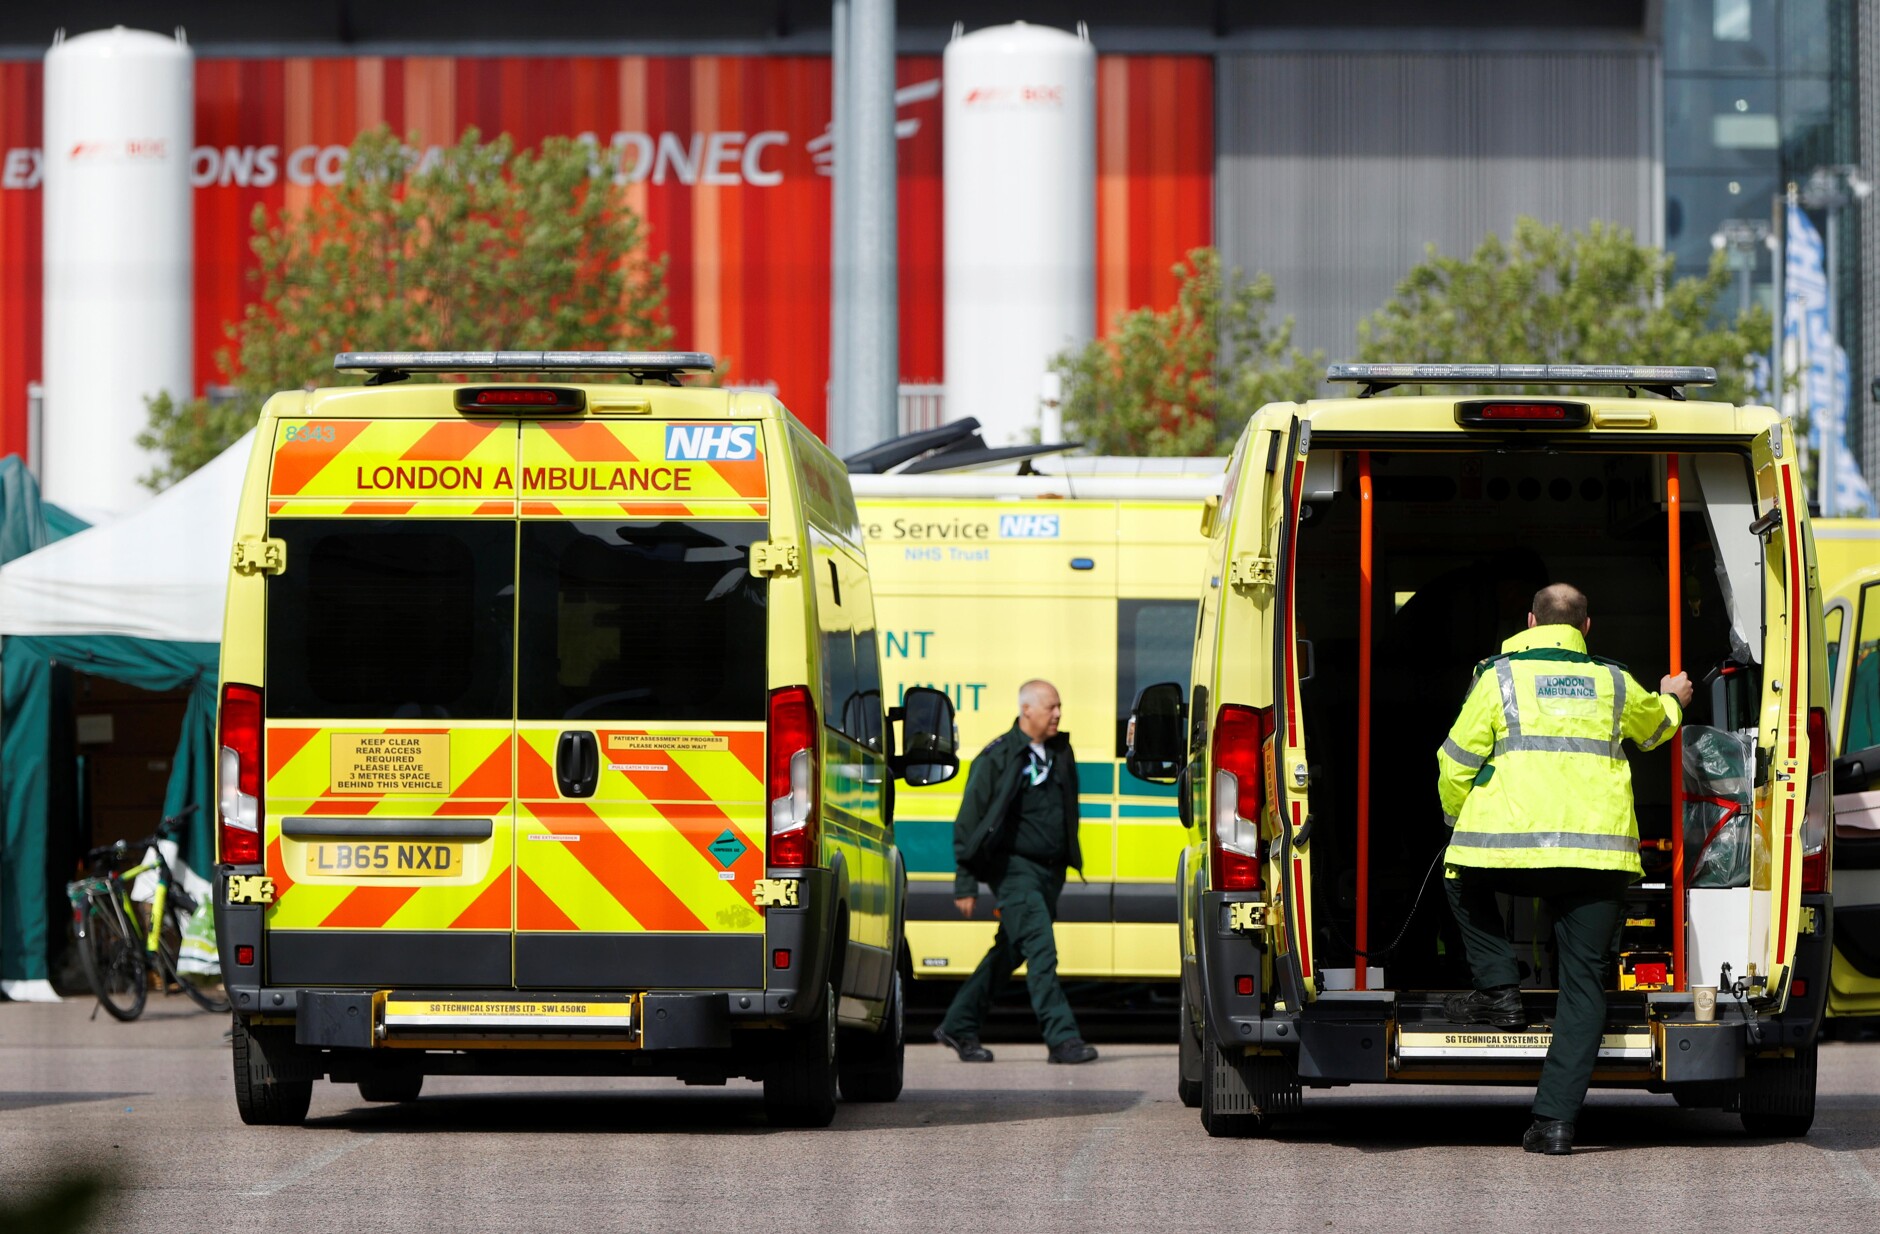 A general view of ambulances and staff outside the NHS Nightingale Hospital at the Excel Centre, following the outbreak of the coronavirus disease (COVID-19), London, Britain